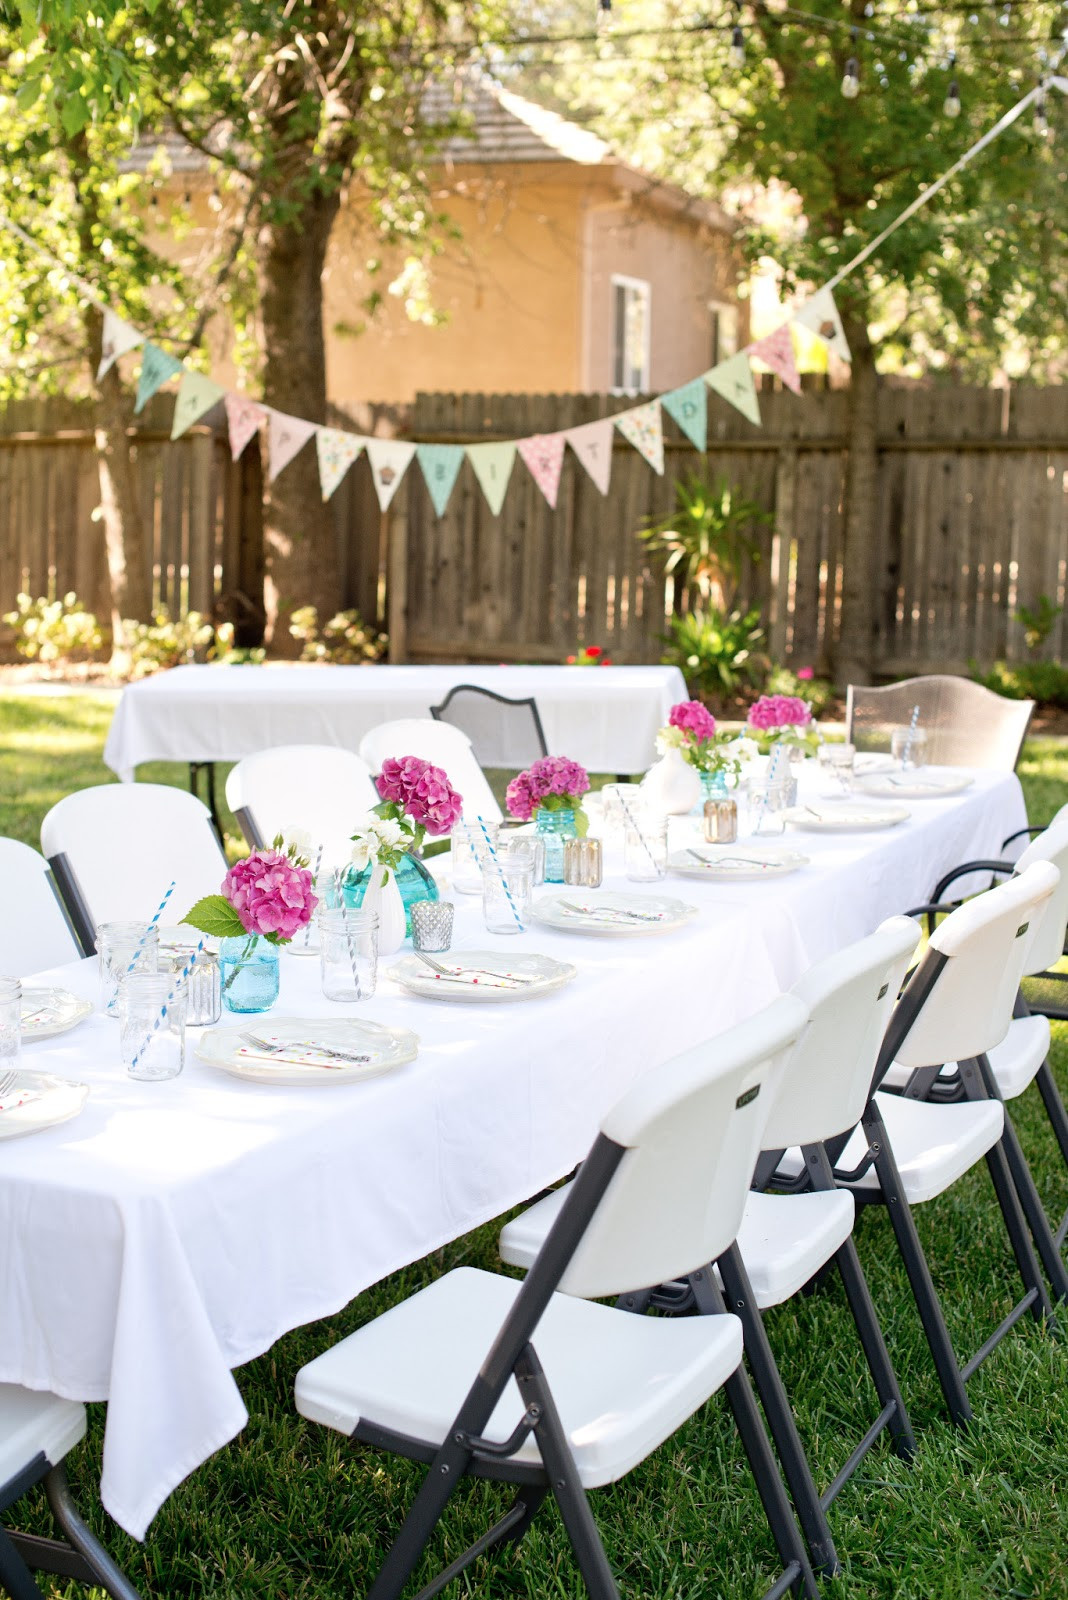 Decoration Ideas For Backyard Party
 Backyard Party Decorations For Unfor table Moments